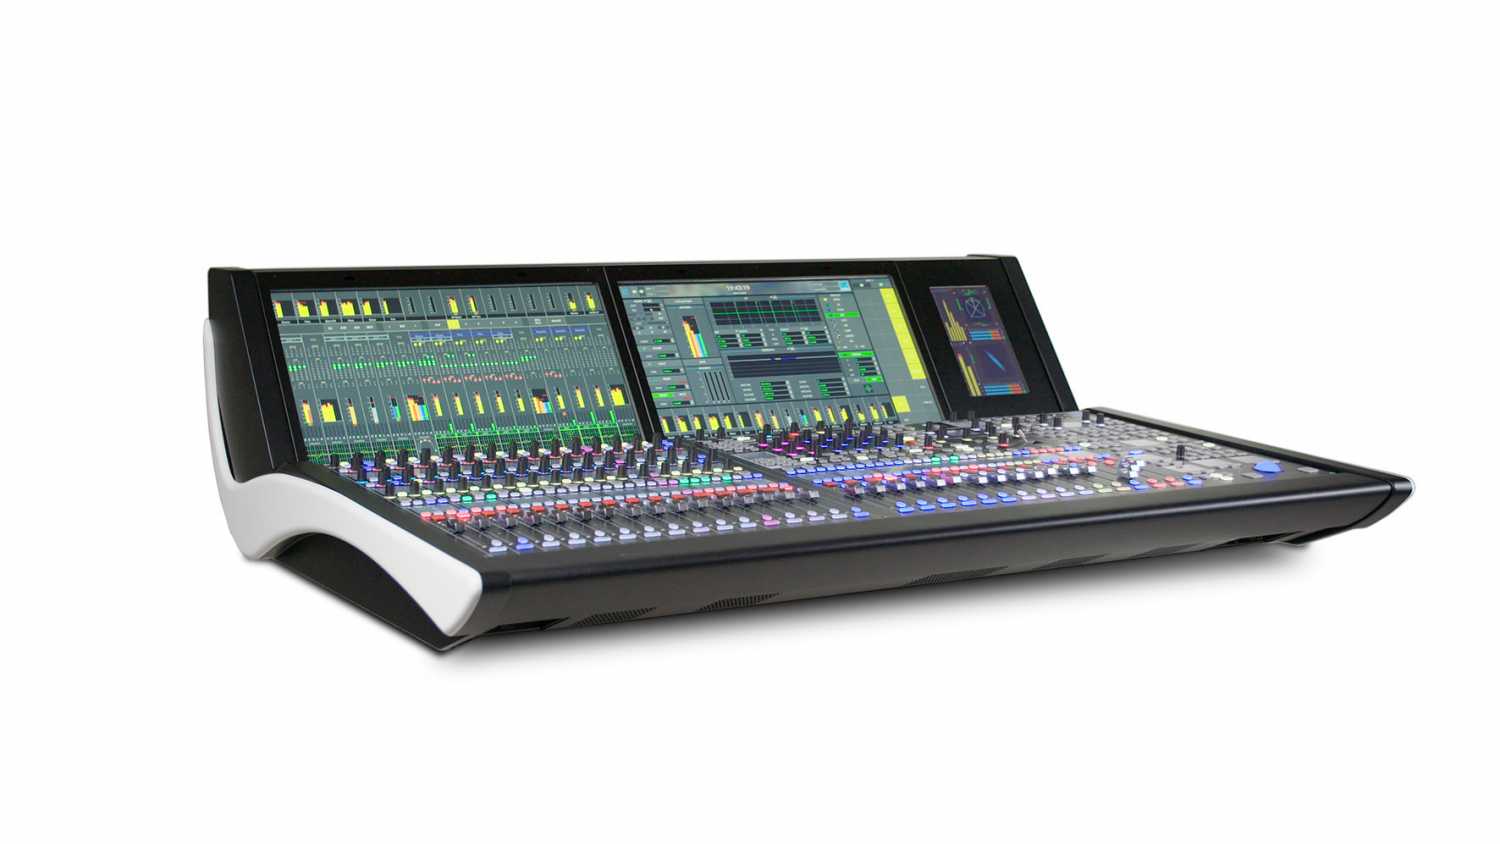 On show will be an IP-based, 48-fader mc²56 audio production console